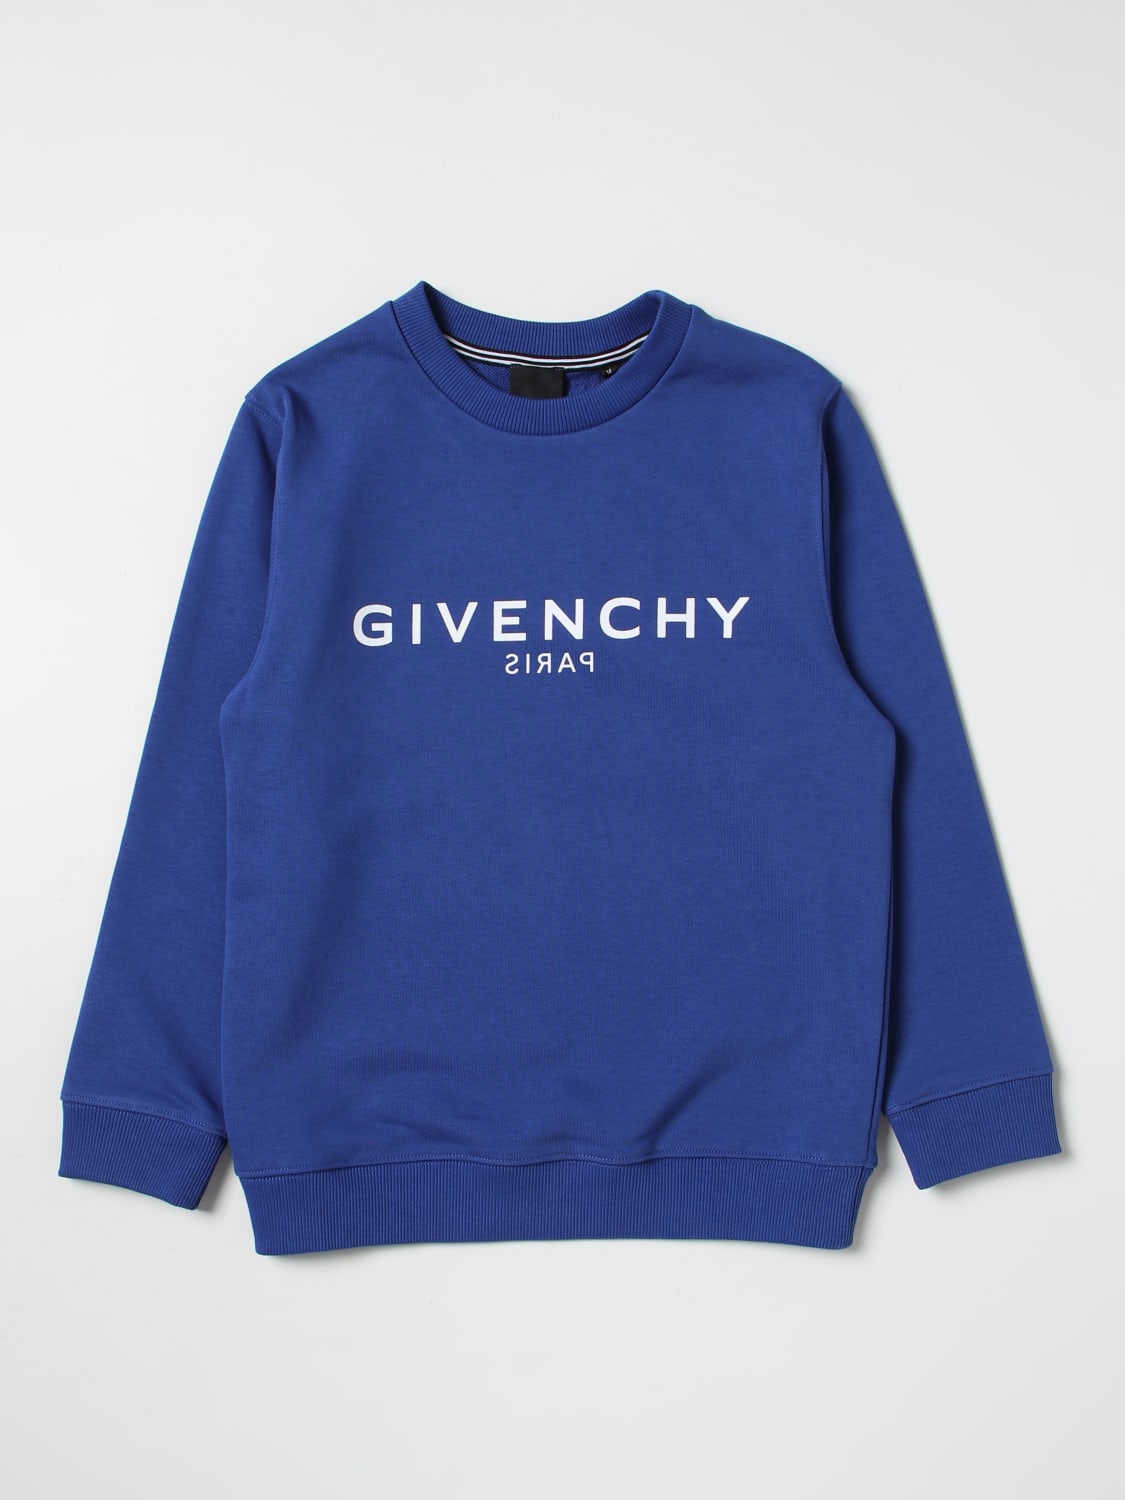 scherm Botsing Brouwerij GIVENCHY: sweatshirt in cotton blend - Electric Blue | Givenchy sweater  H25424 online on GIGLIO.COM